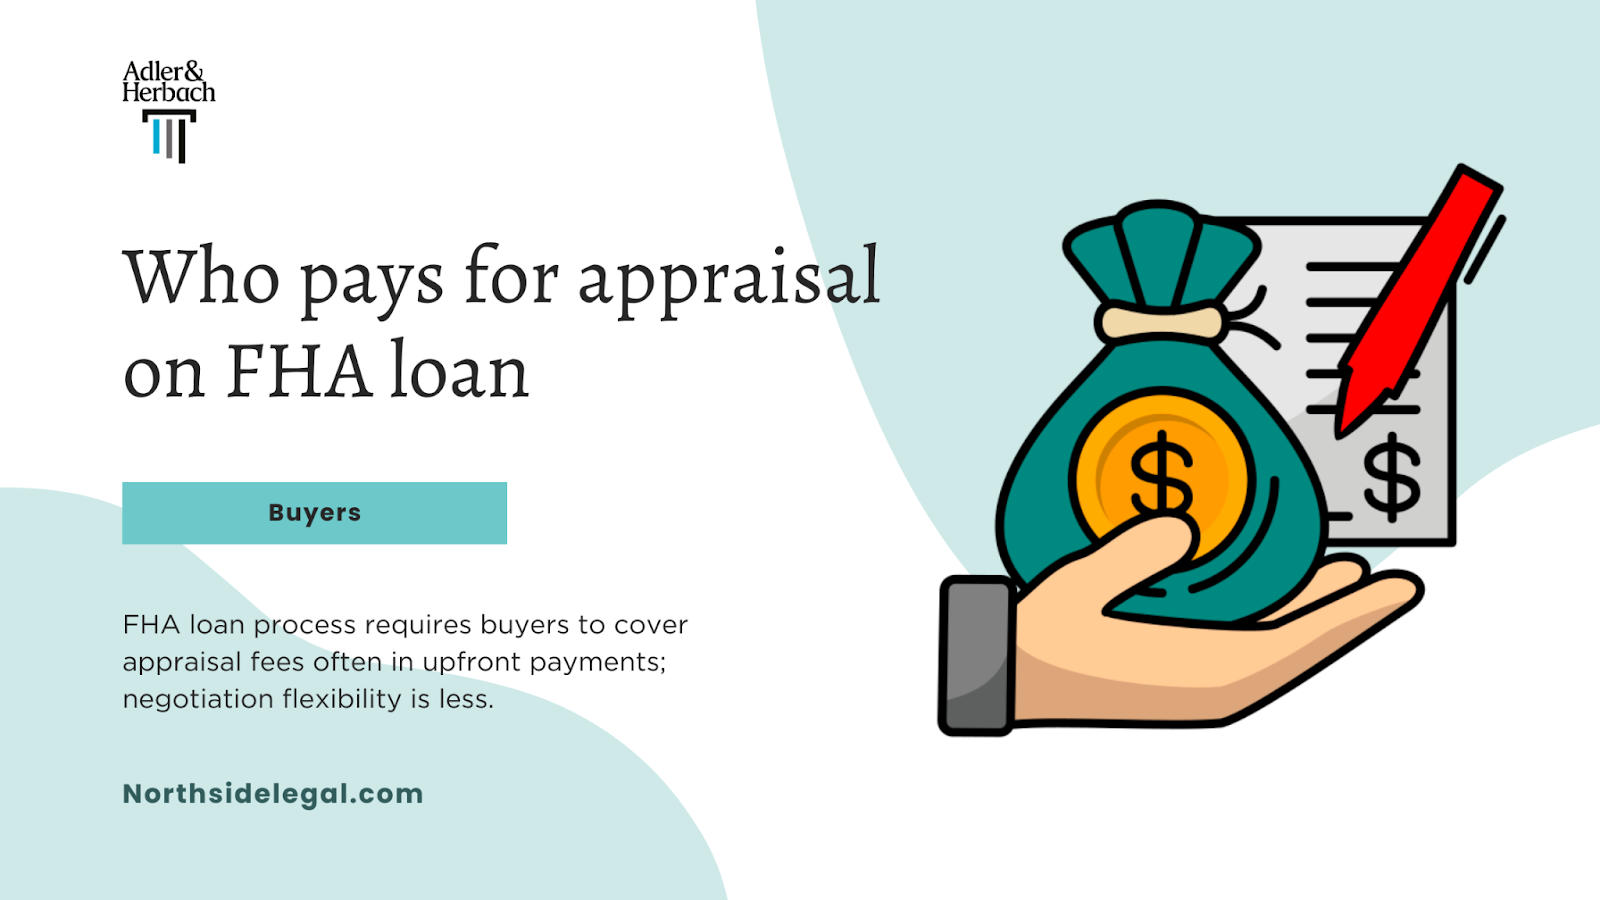 Who pays for appraisal on FHA loan?